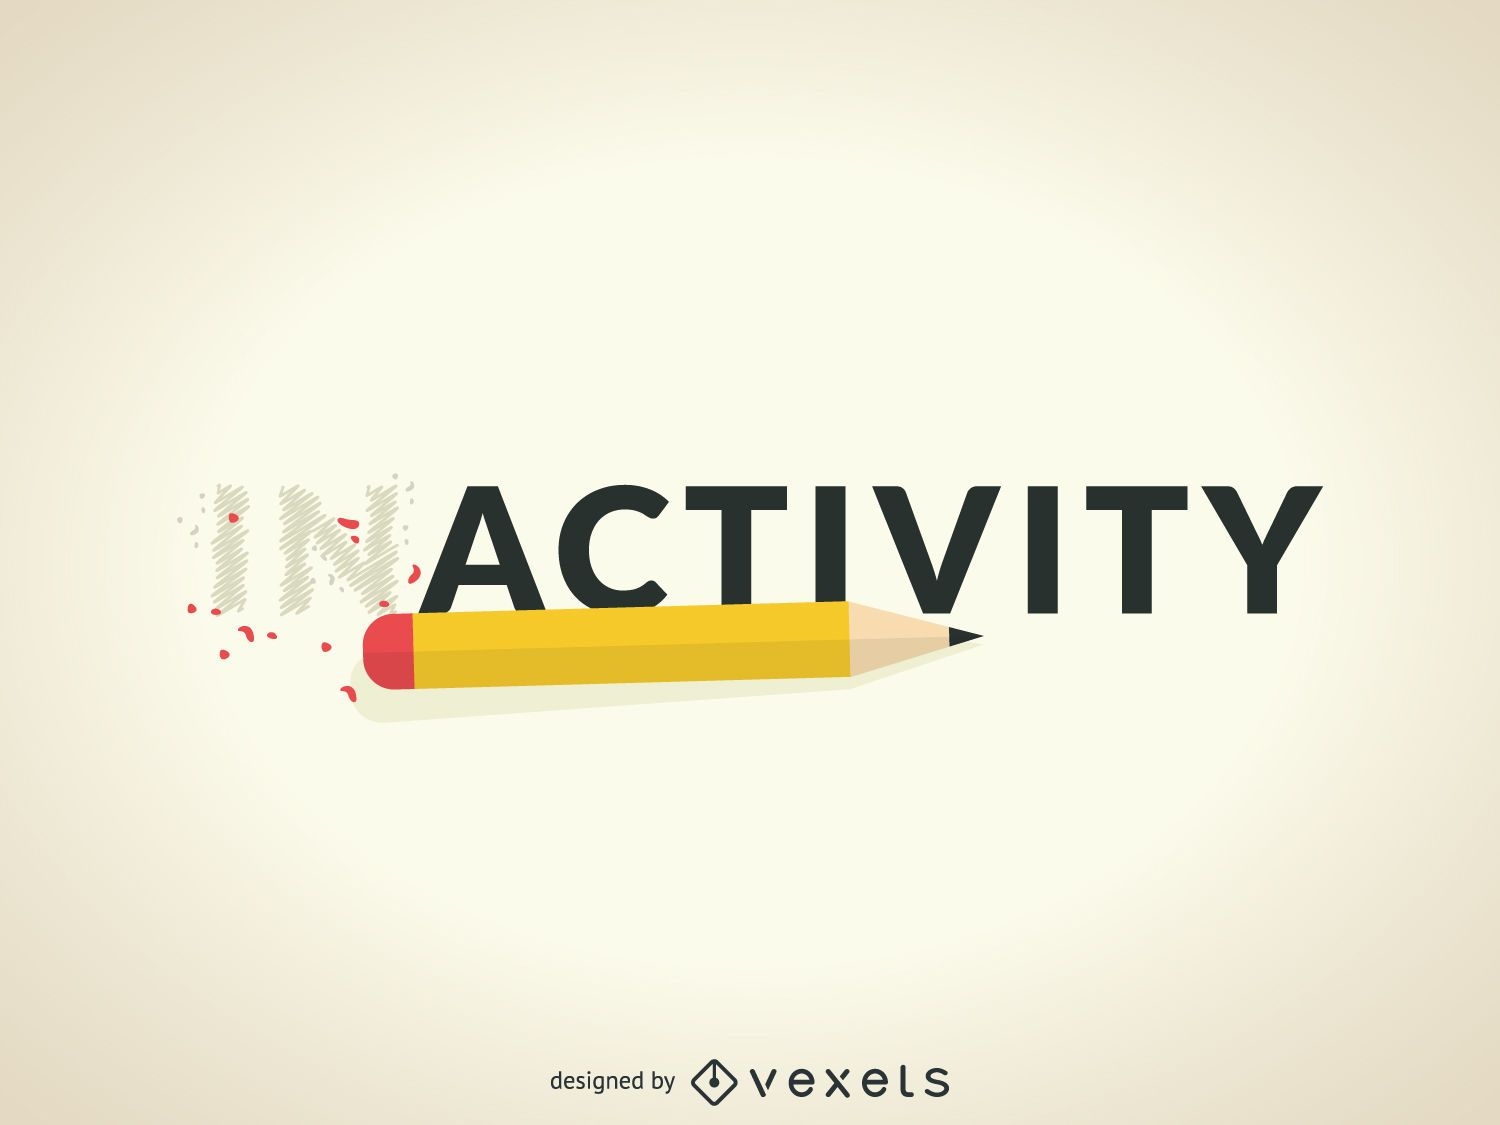 Inactivity to activity concept